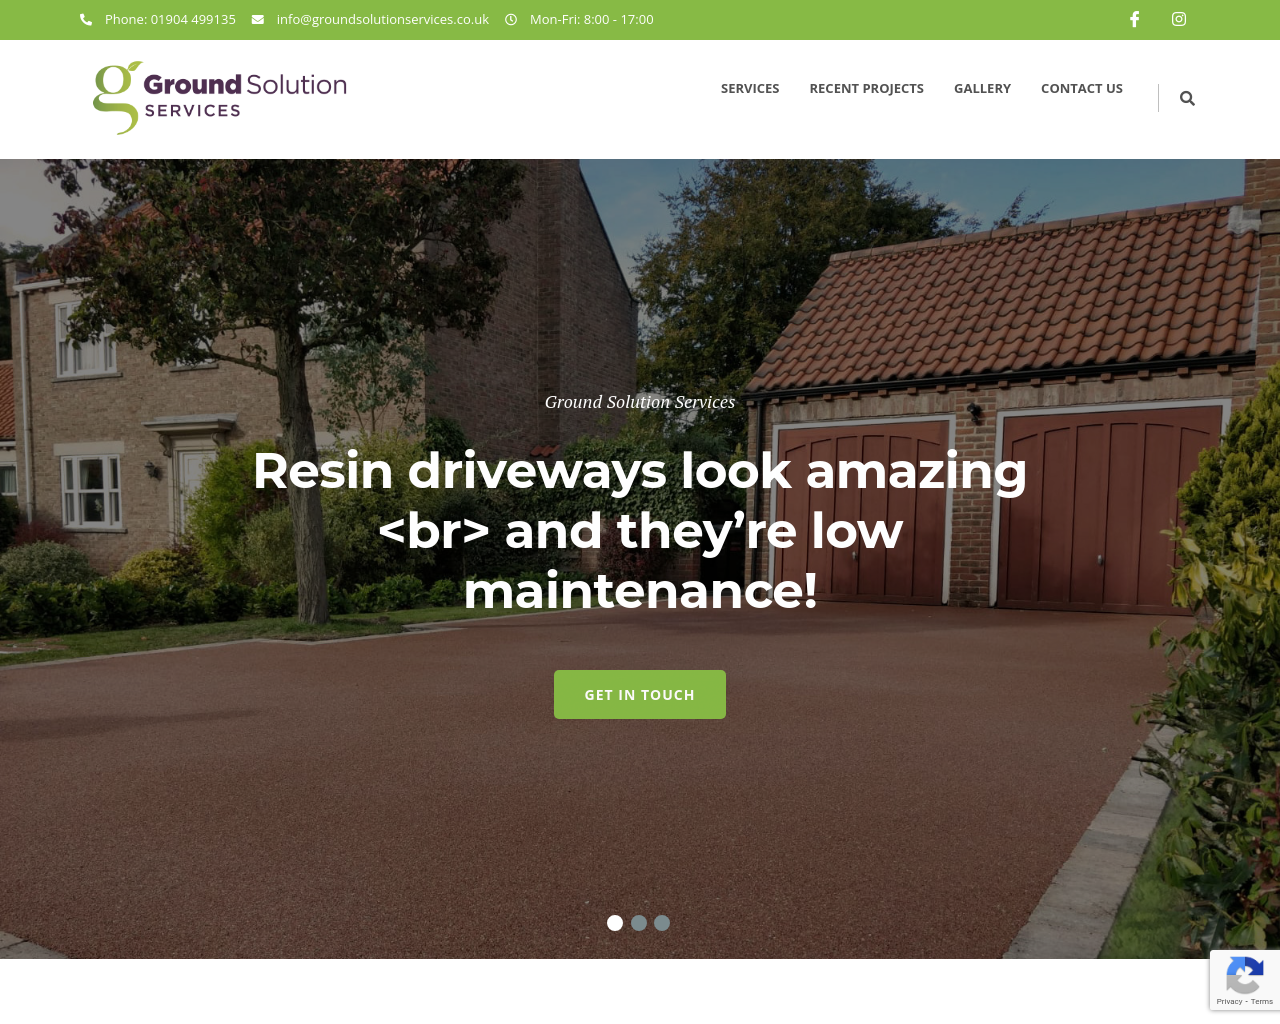 groundsolutionservices.co.uk